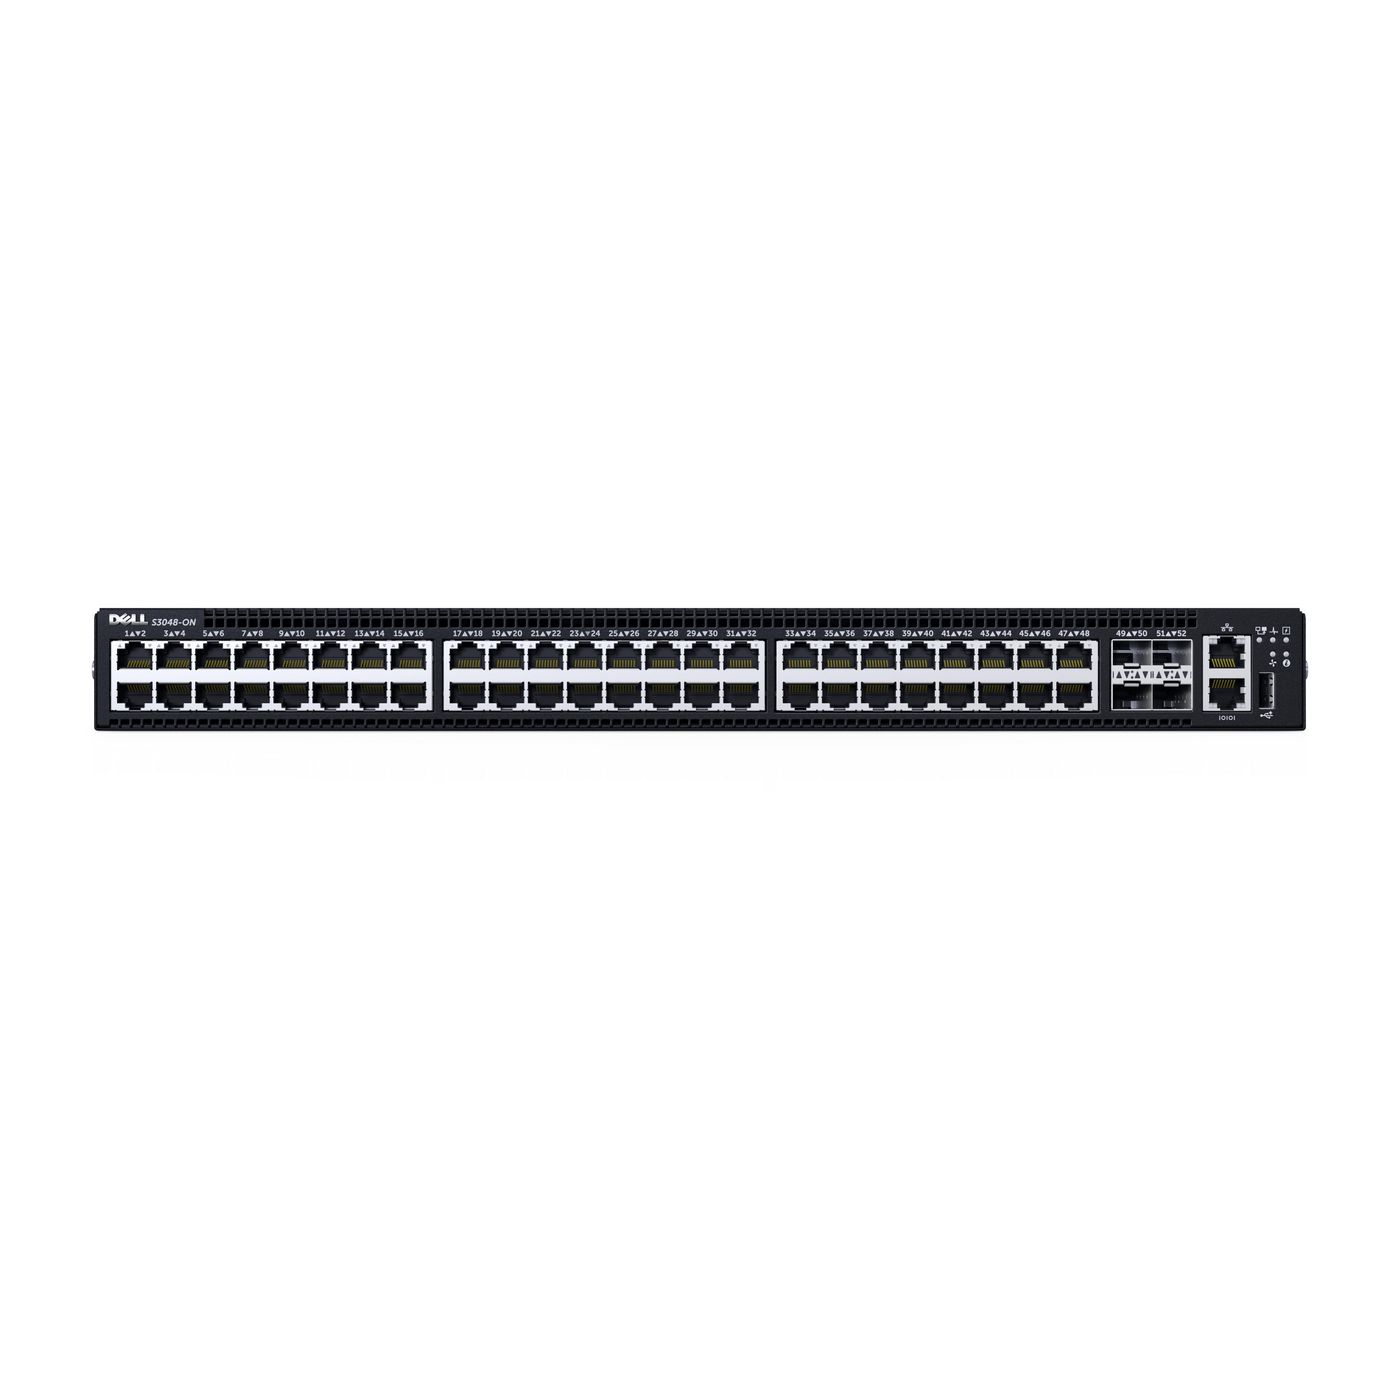 Networking S3048-on 48x 4xsfp+10gbe Ports Stacking Psu To Io